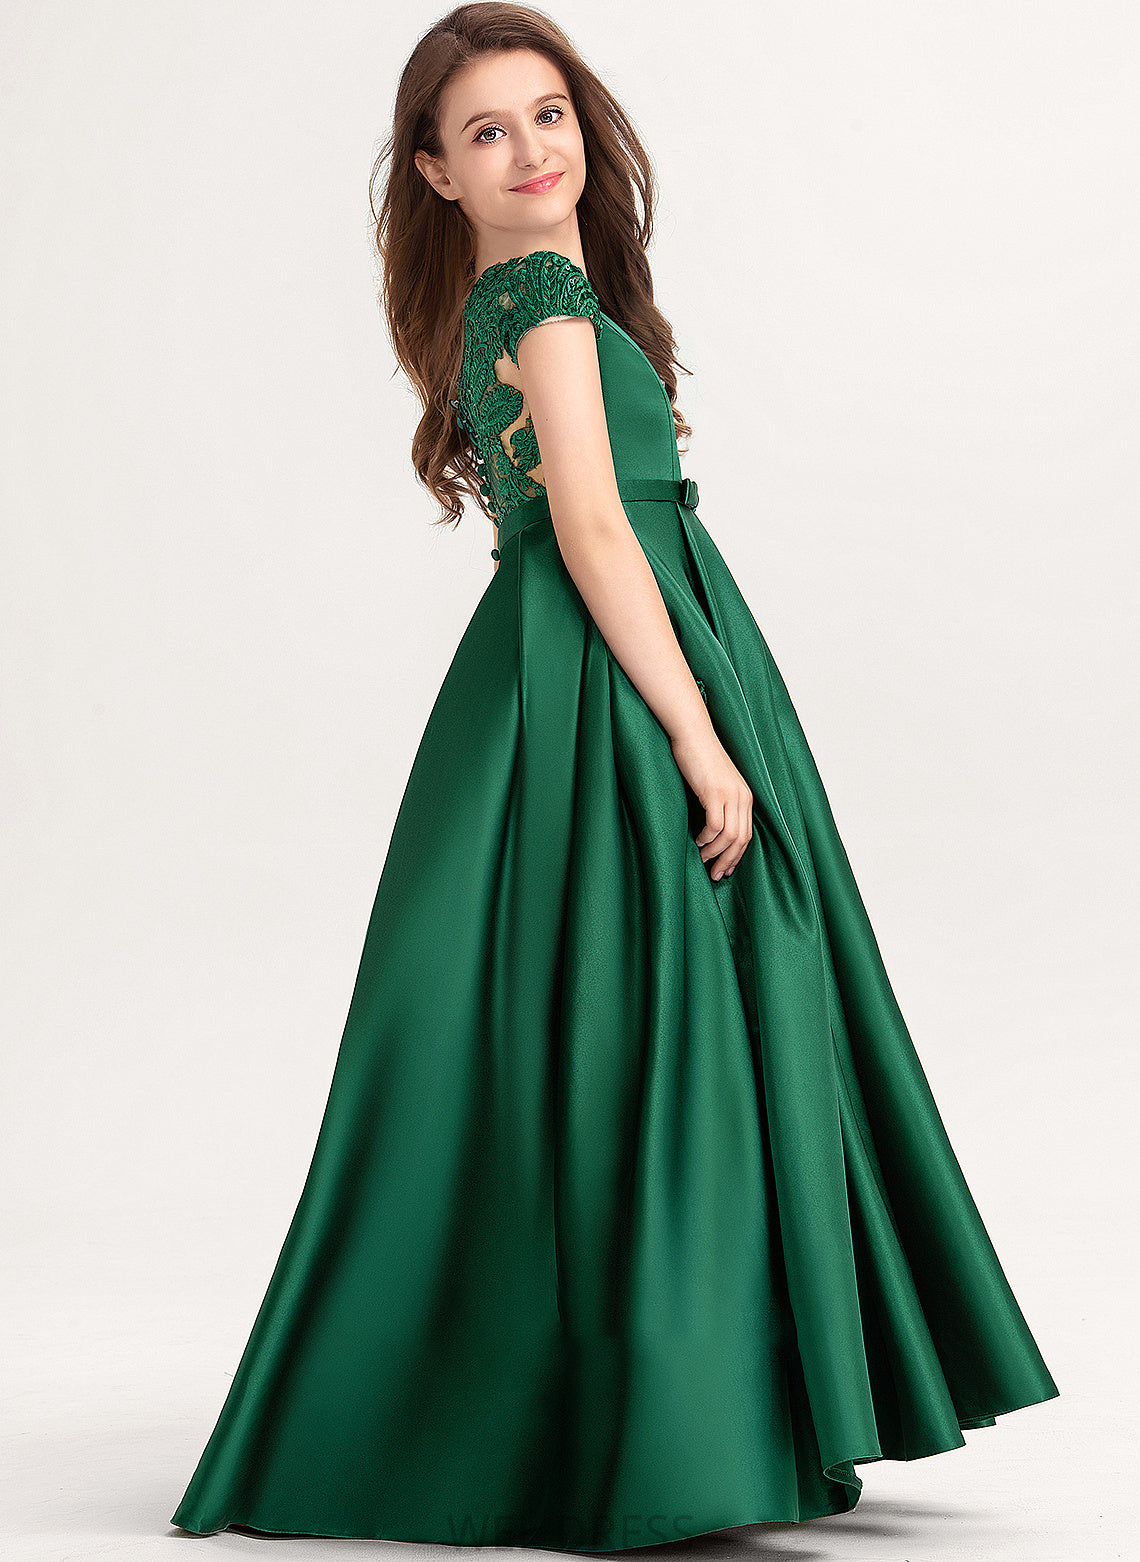 Scoop Ball-Gown/Princess Junior Bridesmaid Dresses Pockets Lace Satin Floor-Length With Neck Bow(s) Jamya